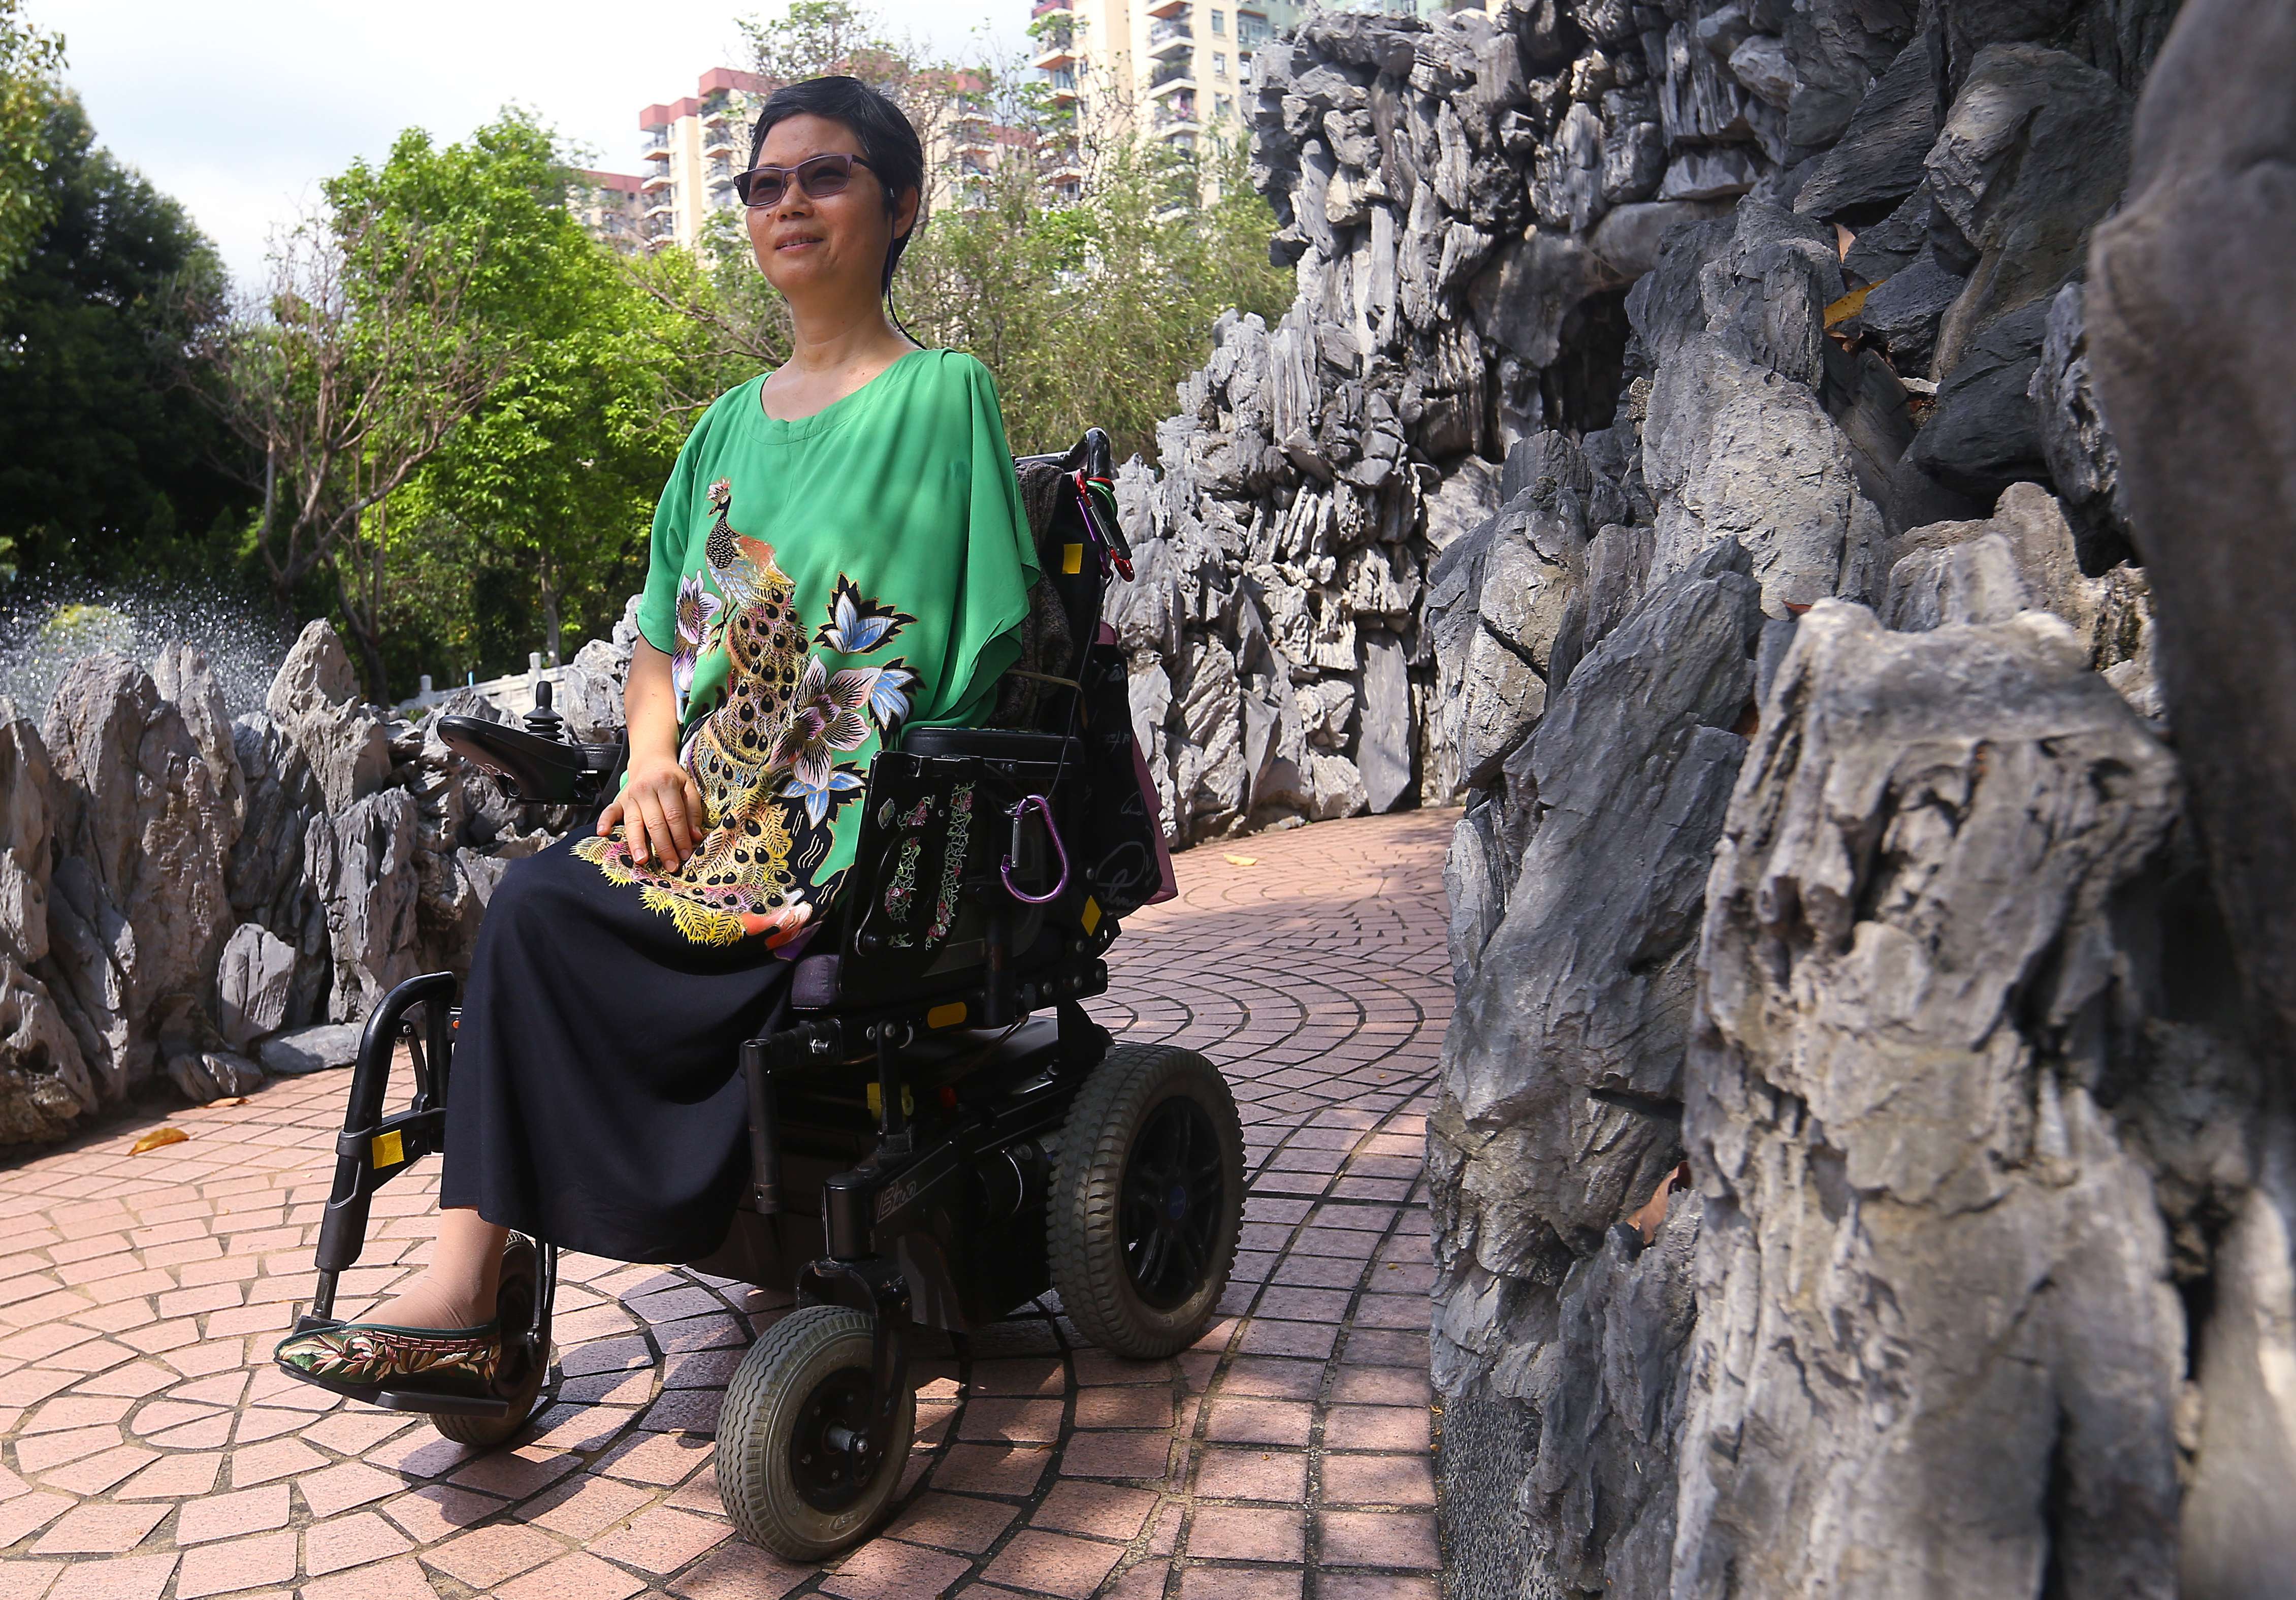 Susanna Tang has overcome great adversity in her life. Photo: Edmond So